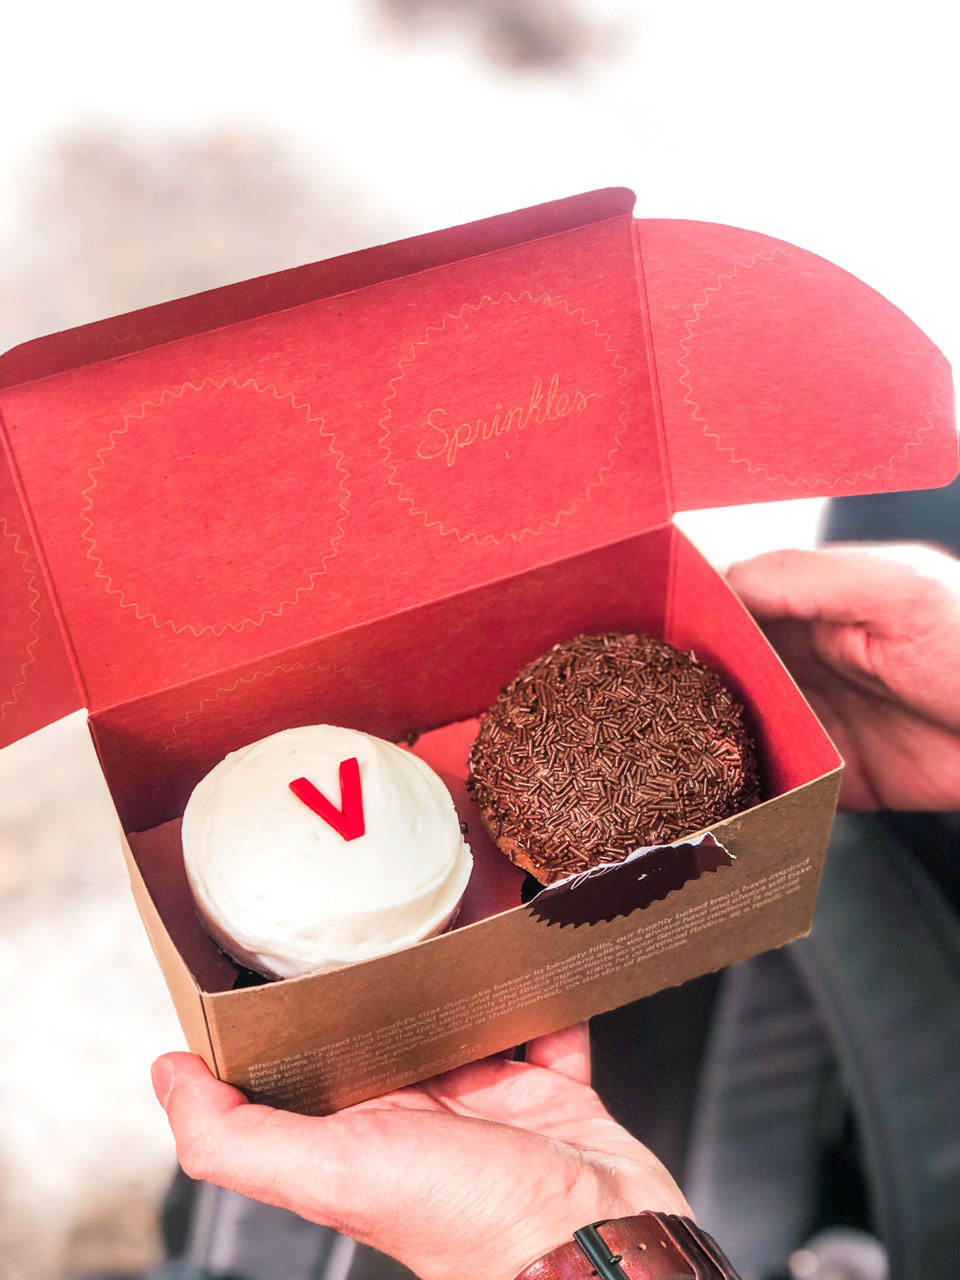 A man holding an open box of Sprinkles cupcakes